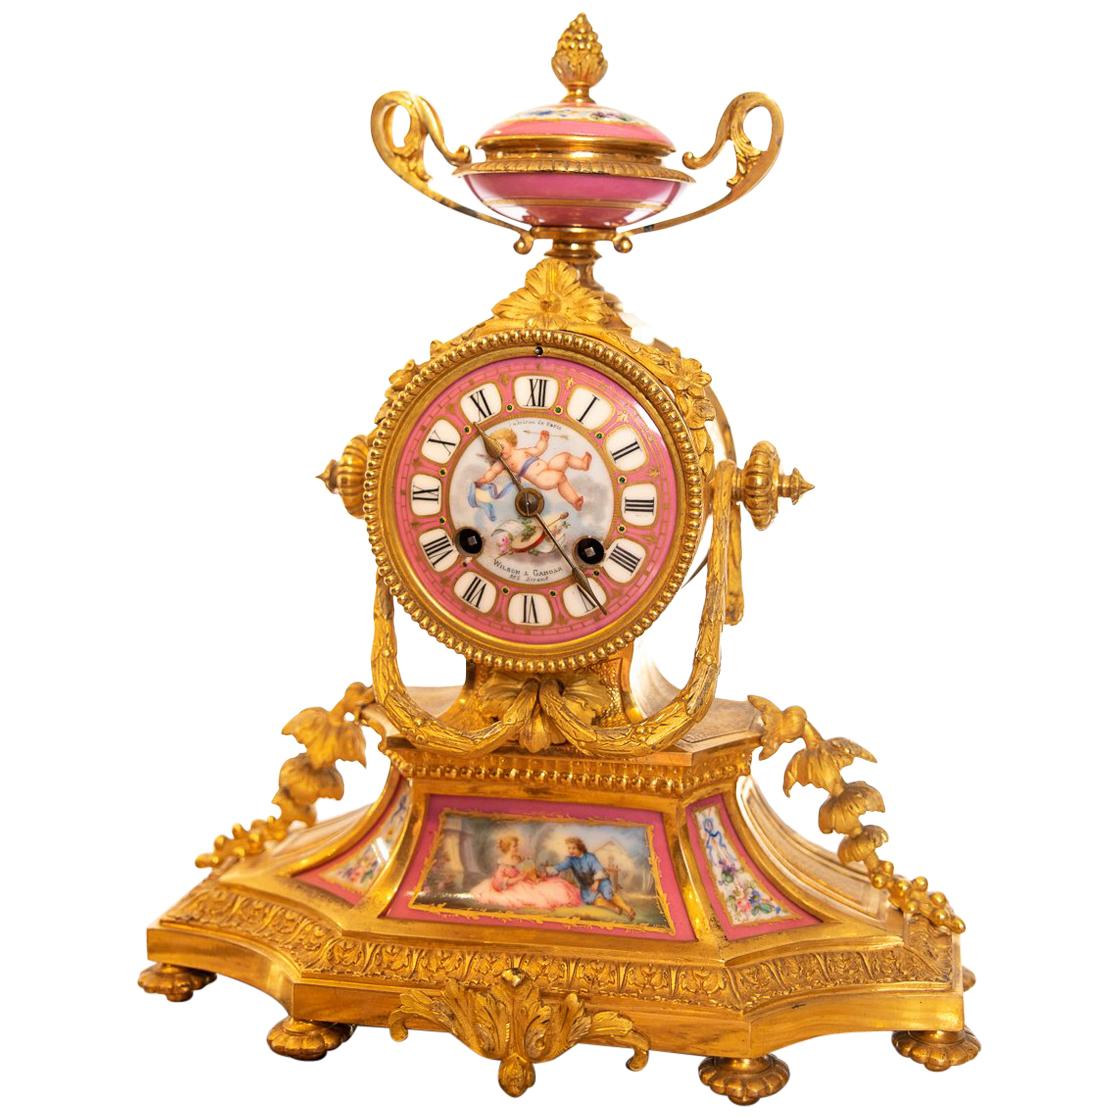 19th Century French Porcelain Panel and Ormolu Mantel Clock